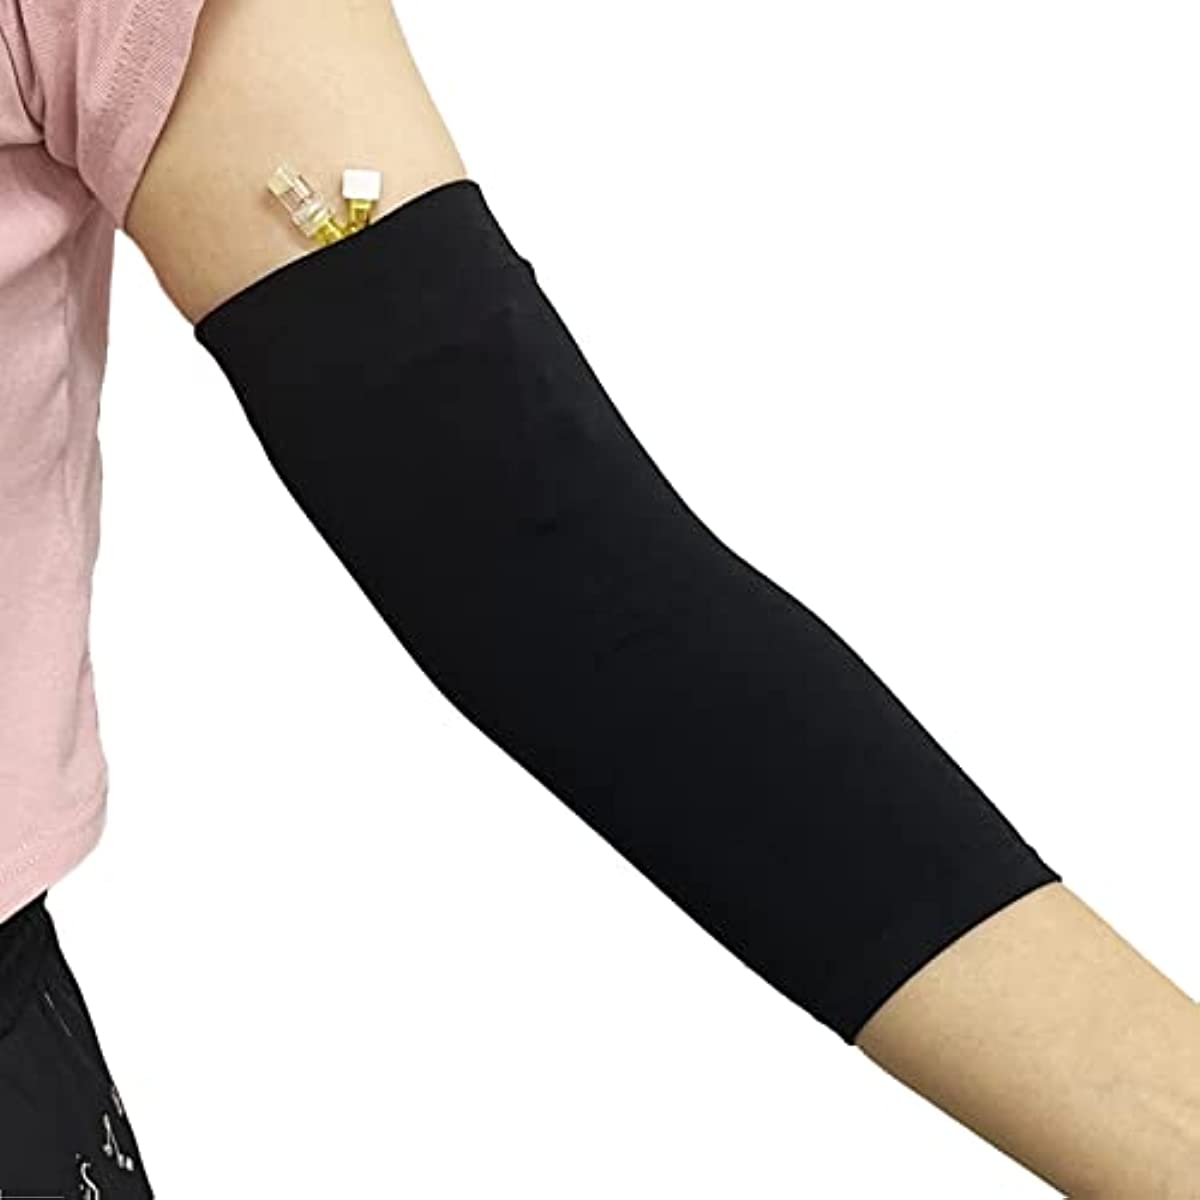 PICC Line Sleeve Protector, Breathable Arm Cast Cover Nursing Supplies for Arm Circumference 9\"-14\", 4 PCS